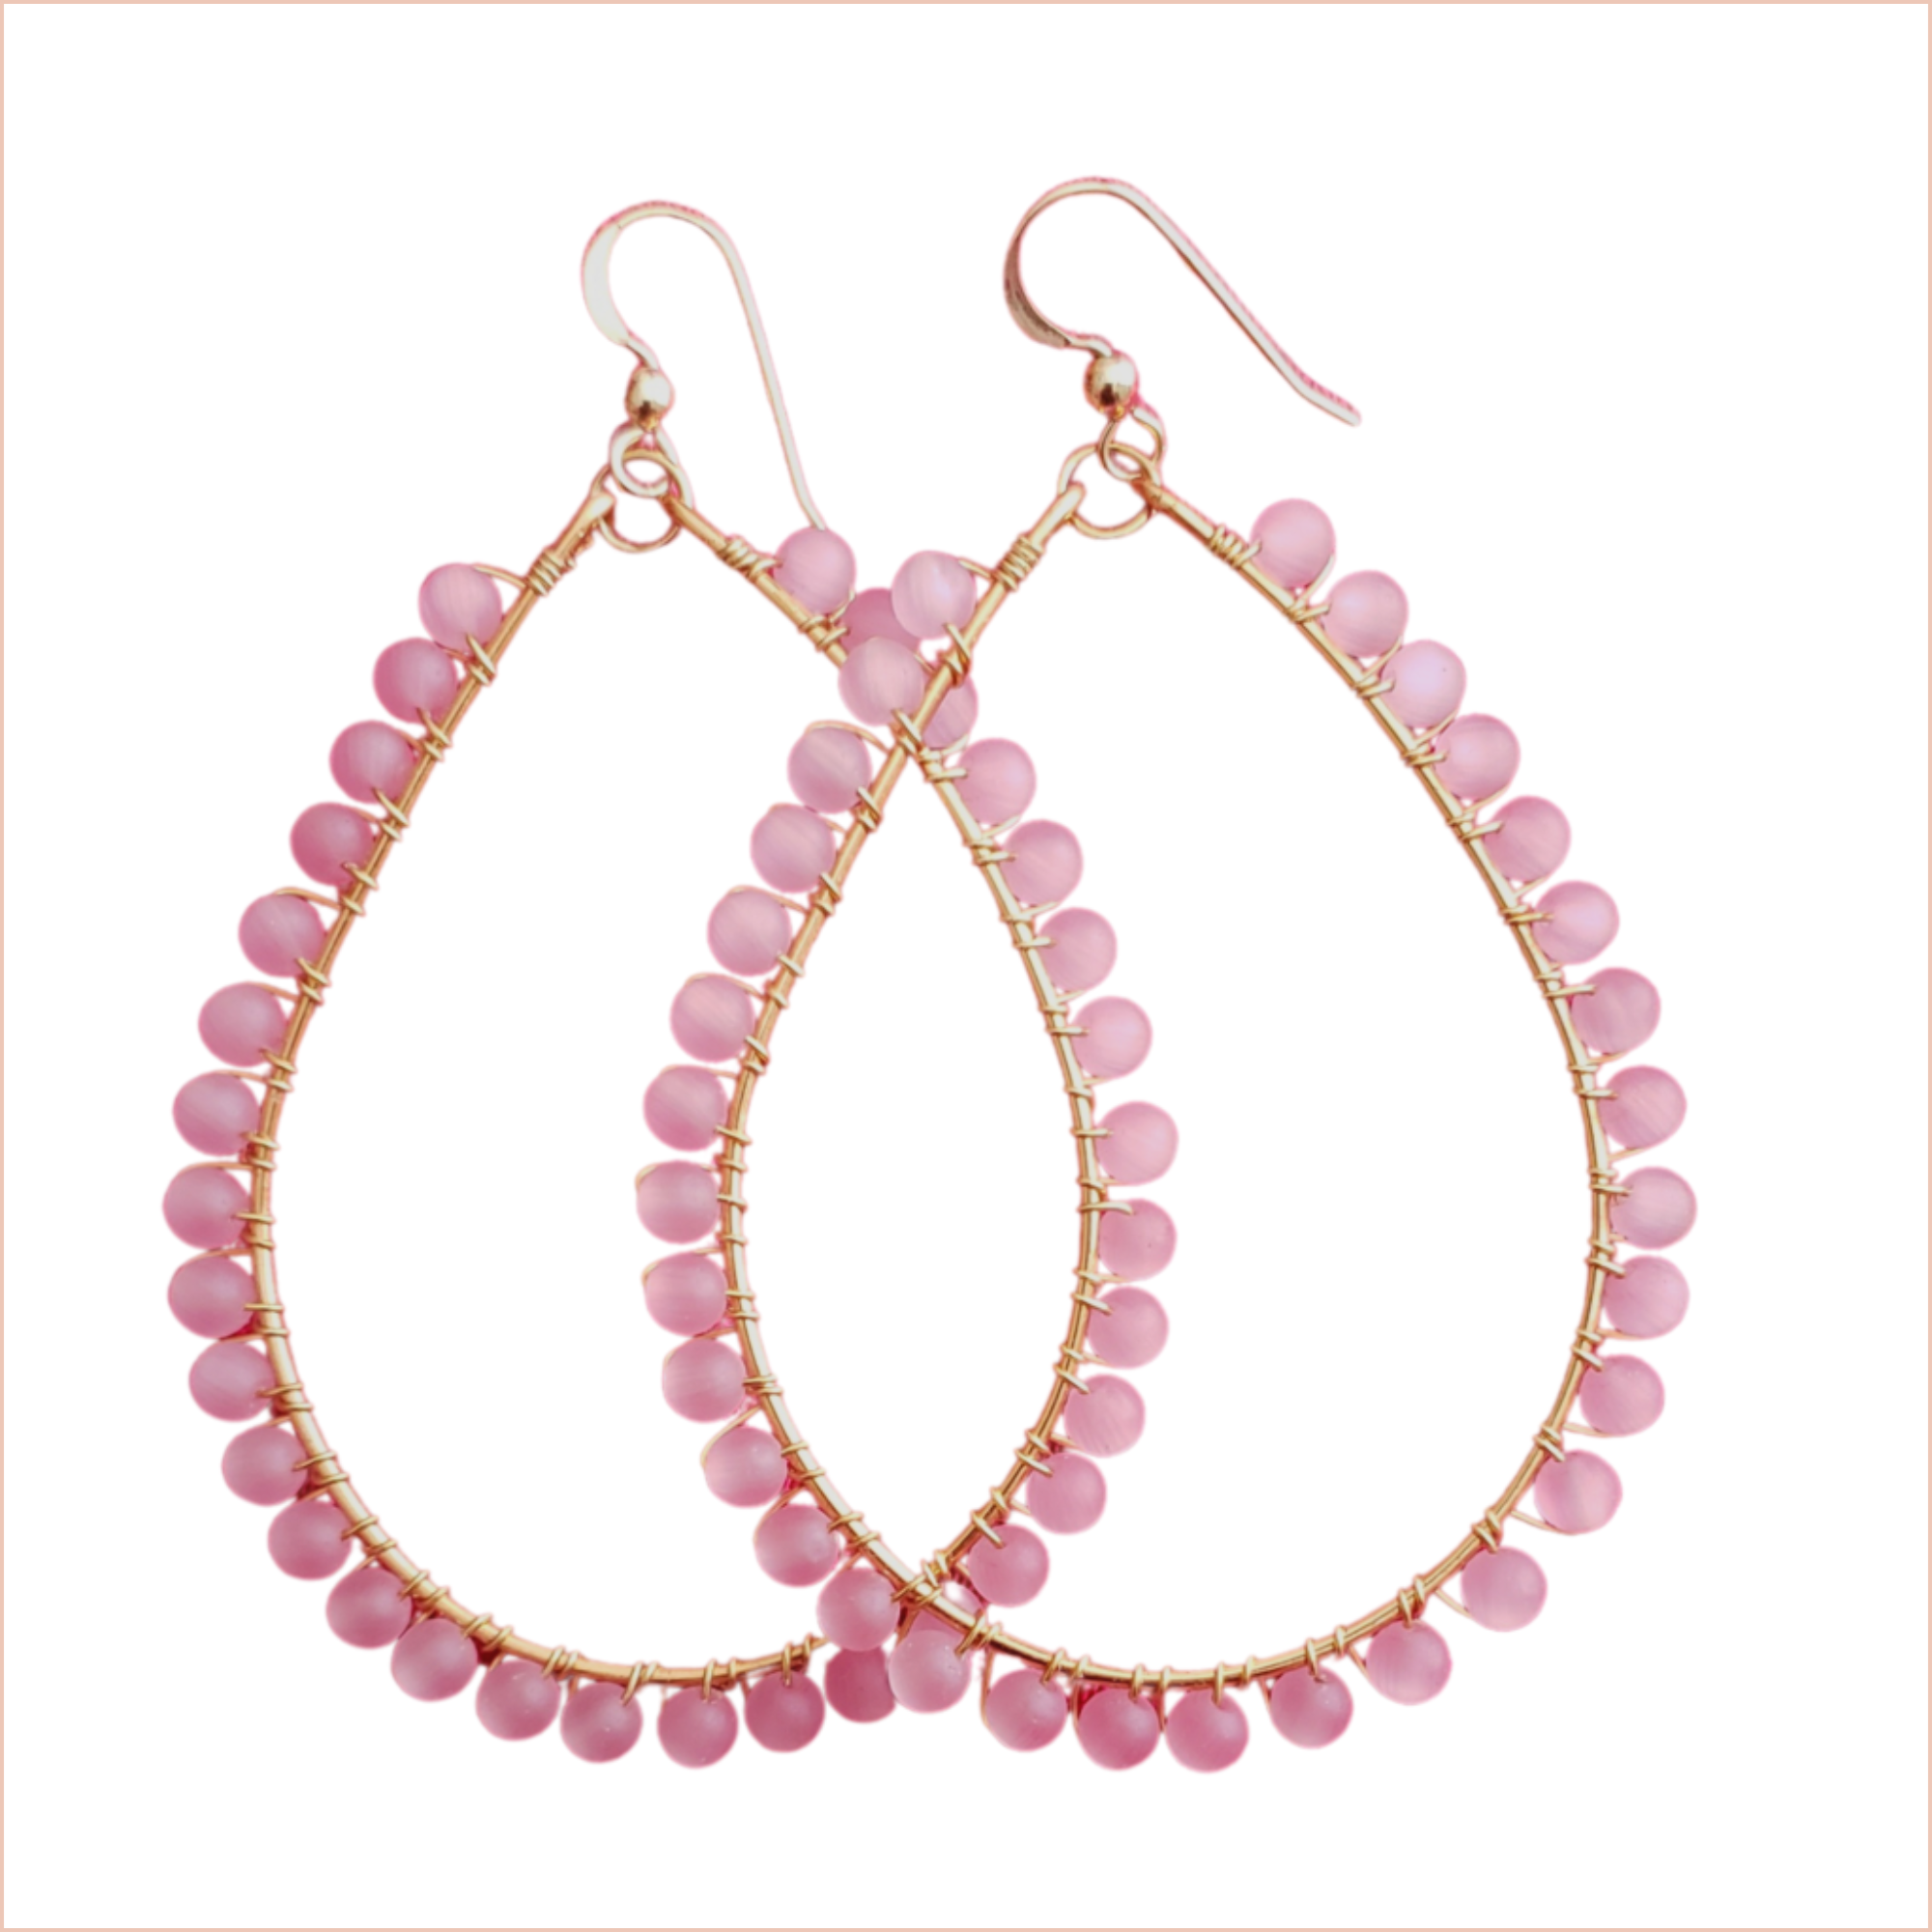 Handmade pink wired hoops by available at http://gemdesignsllc.com